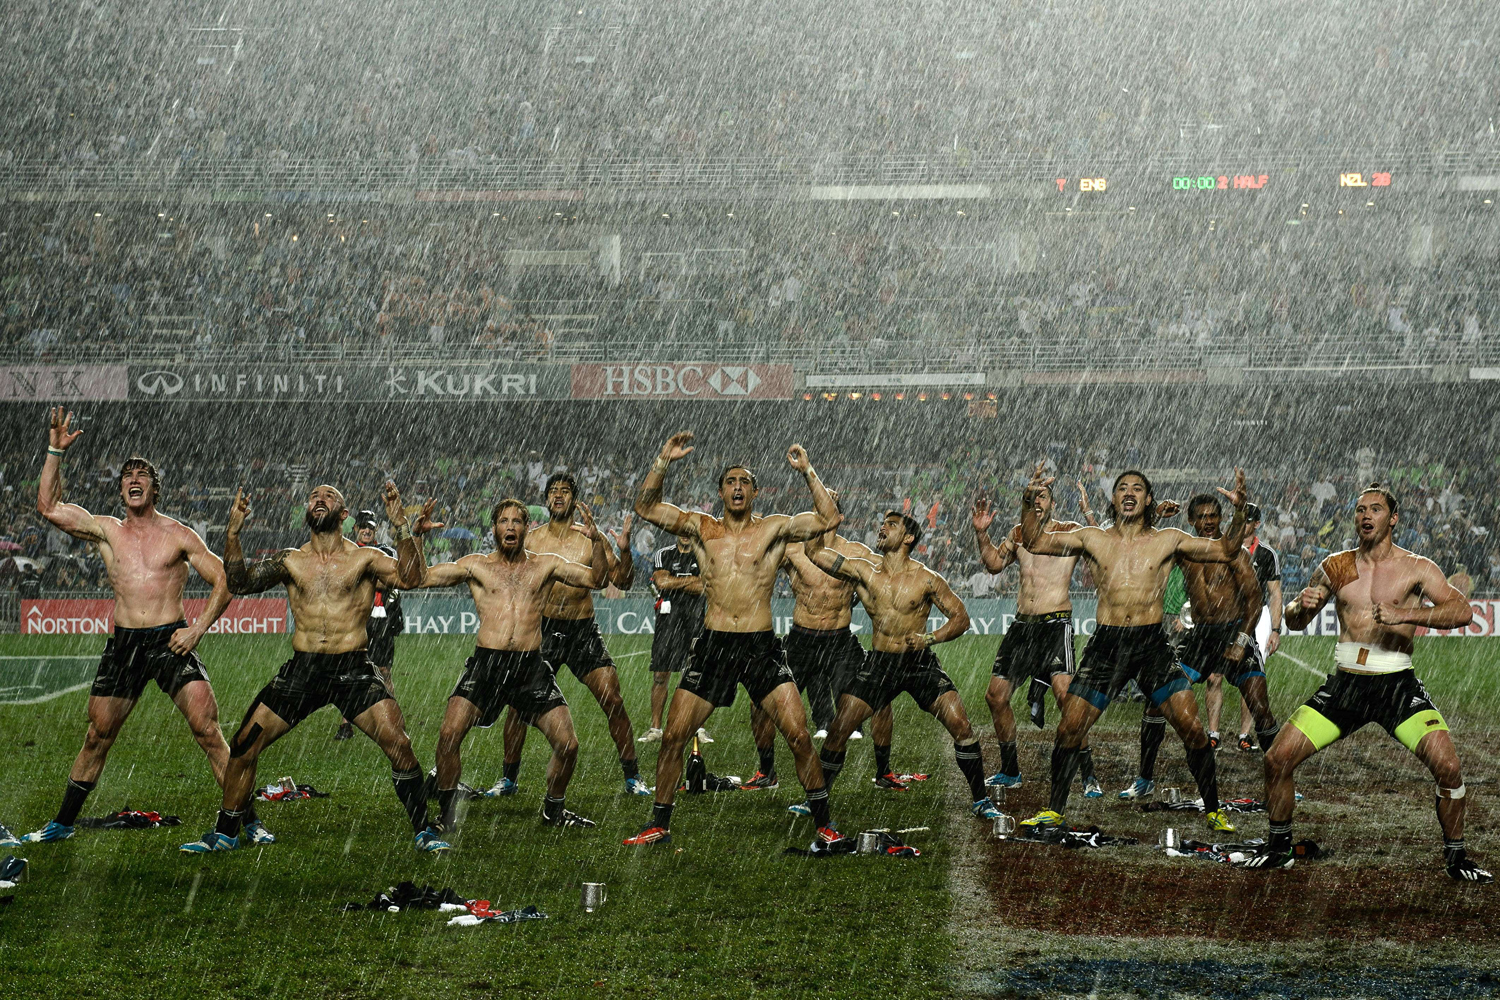 New Zealand players perform the "haka" in the rain after their victory over England in the final match on the last day of the rugby Sevens Tournament at Hong Kong Stadium March 30, 2014.